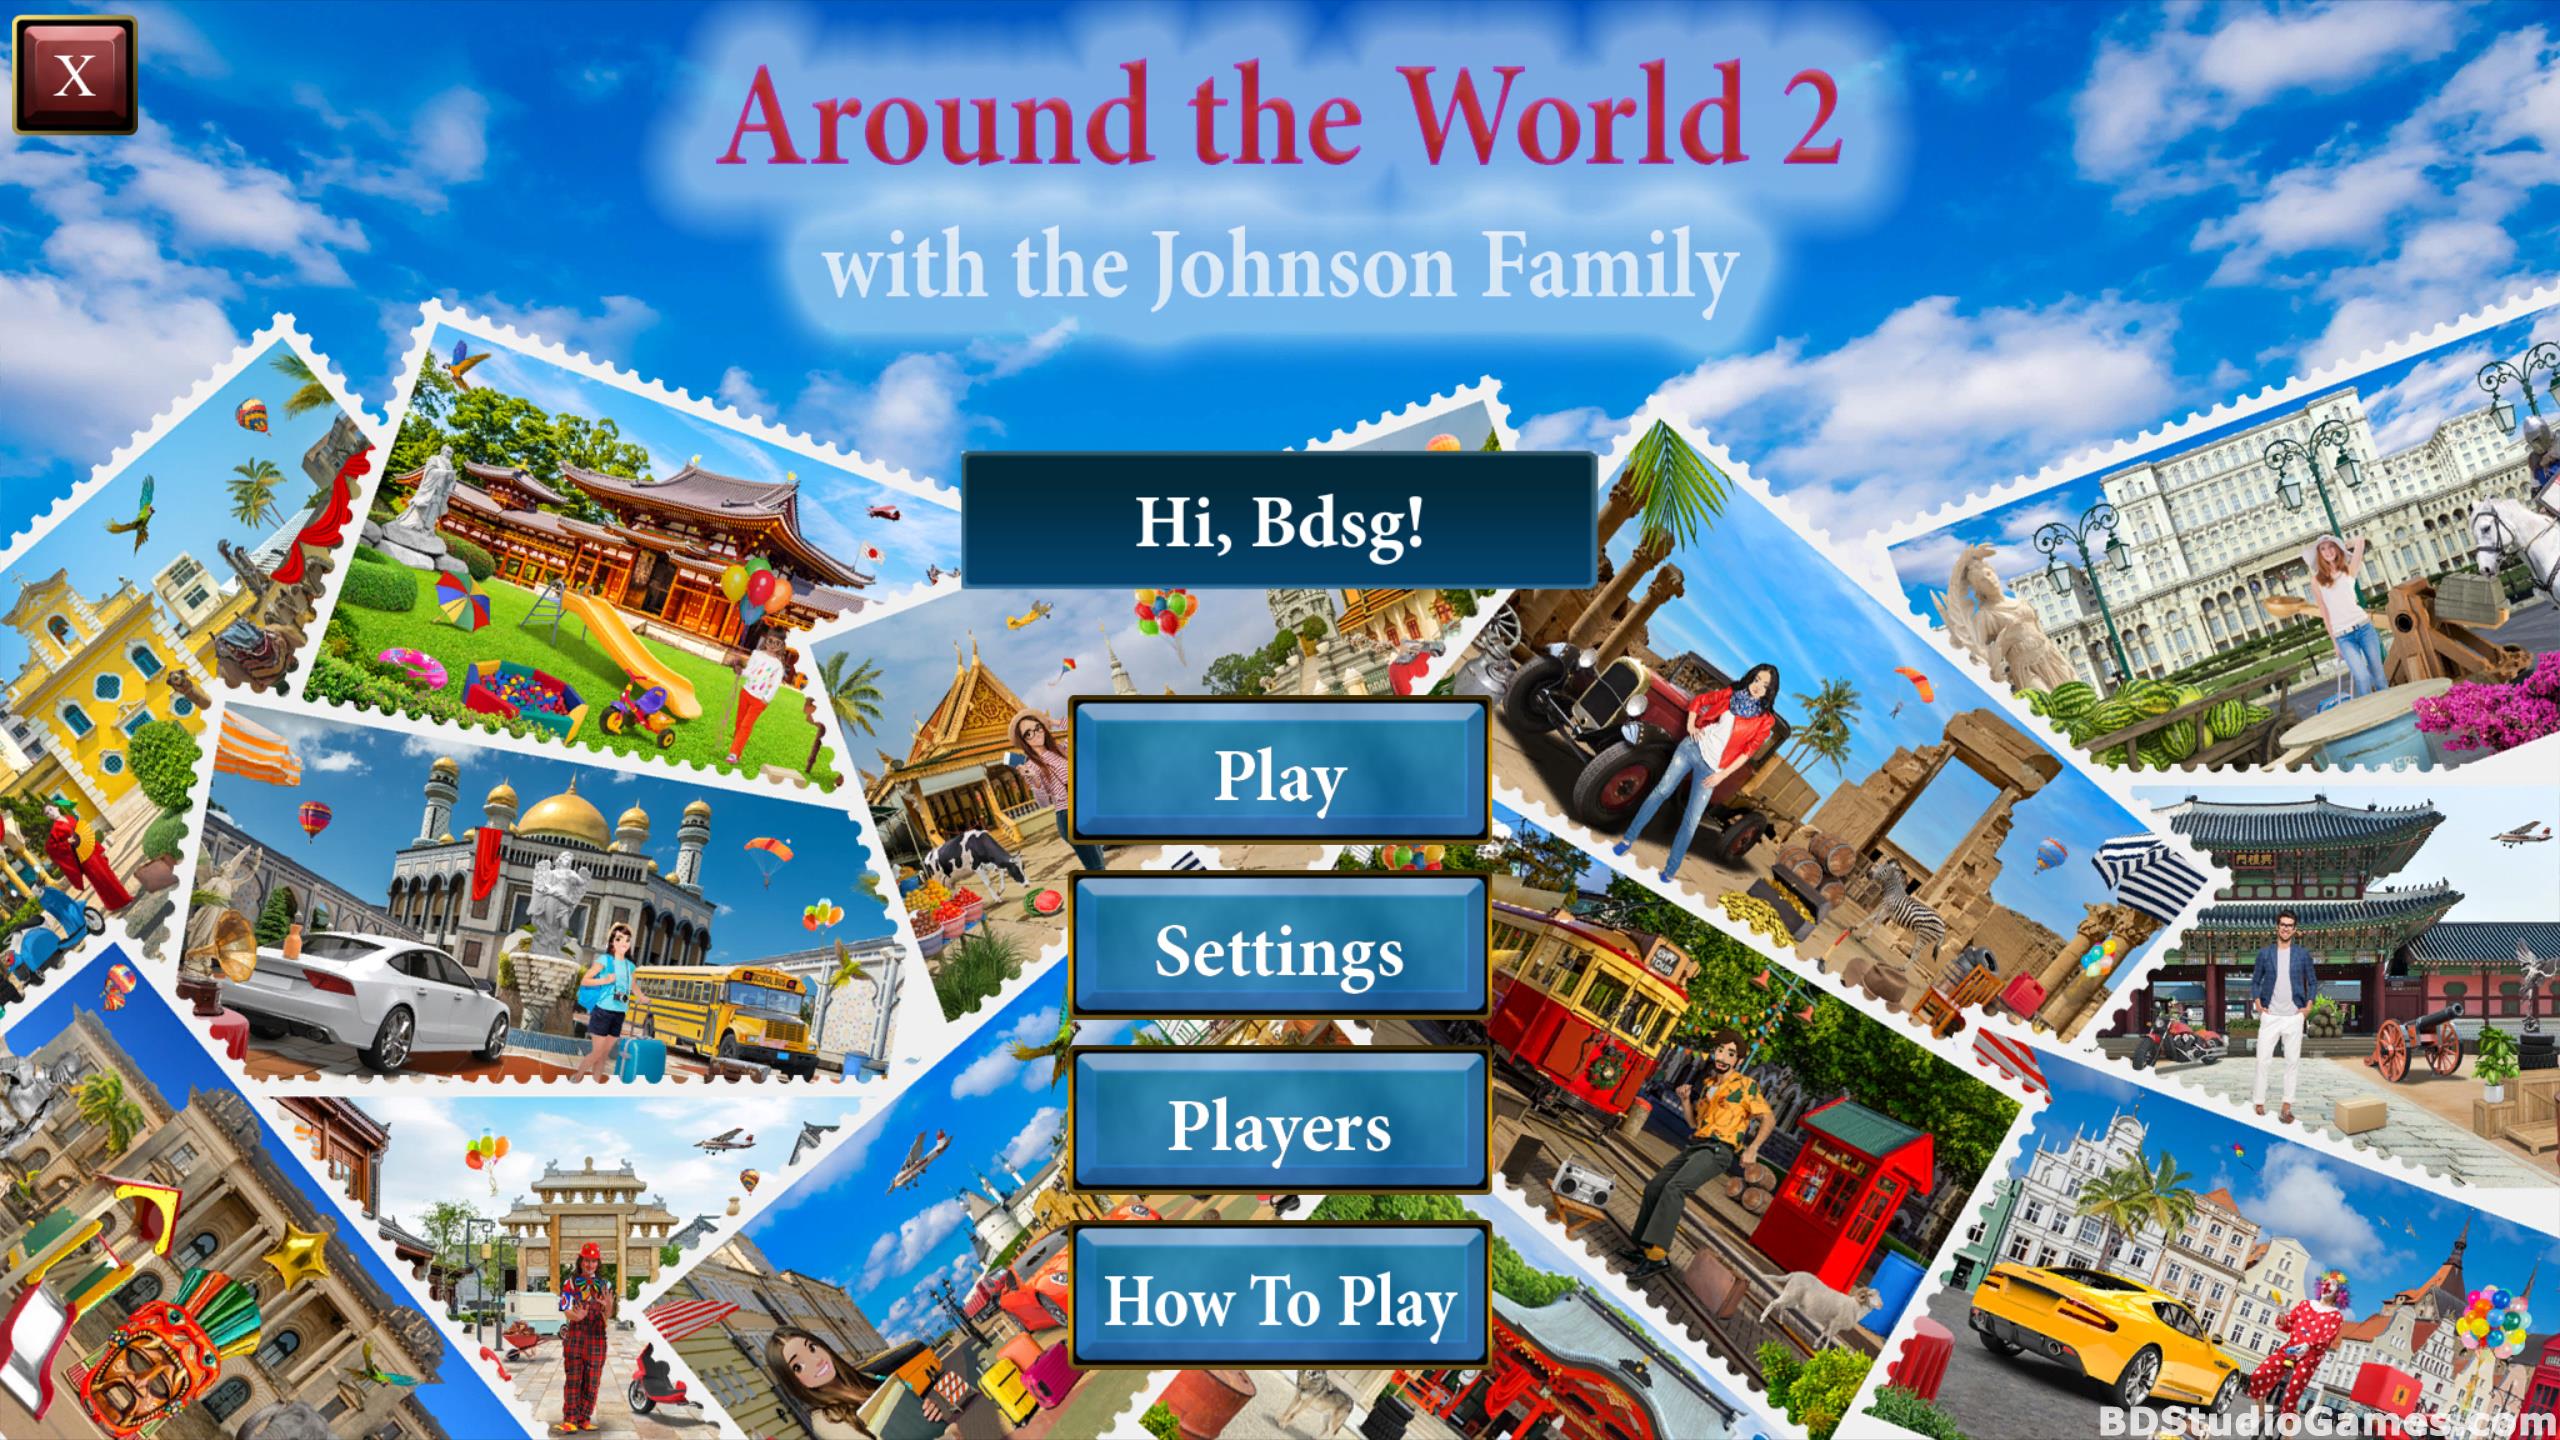 Around the World 2 with the Johnson Family Free Download Screenshots 01